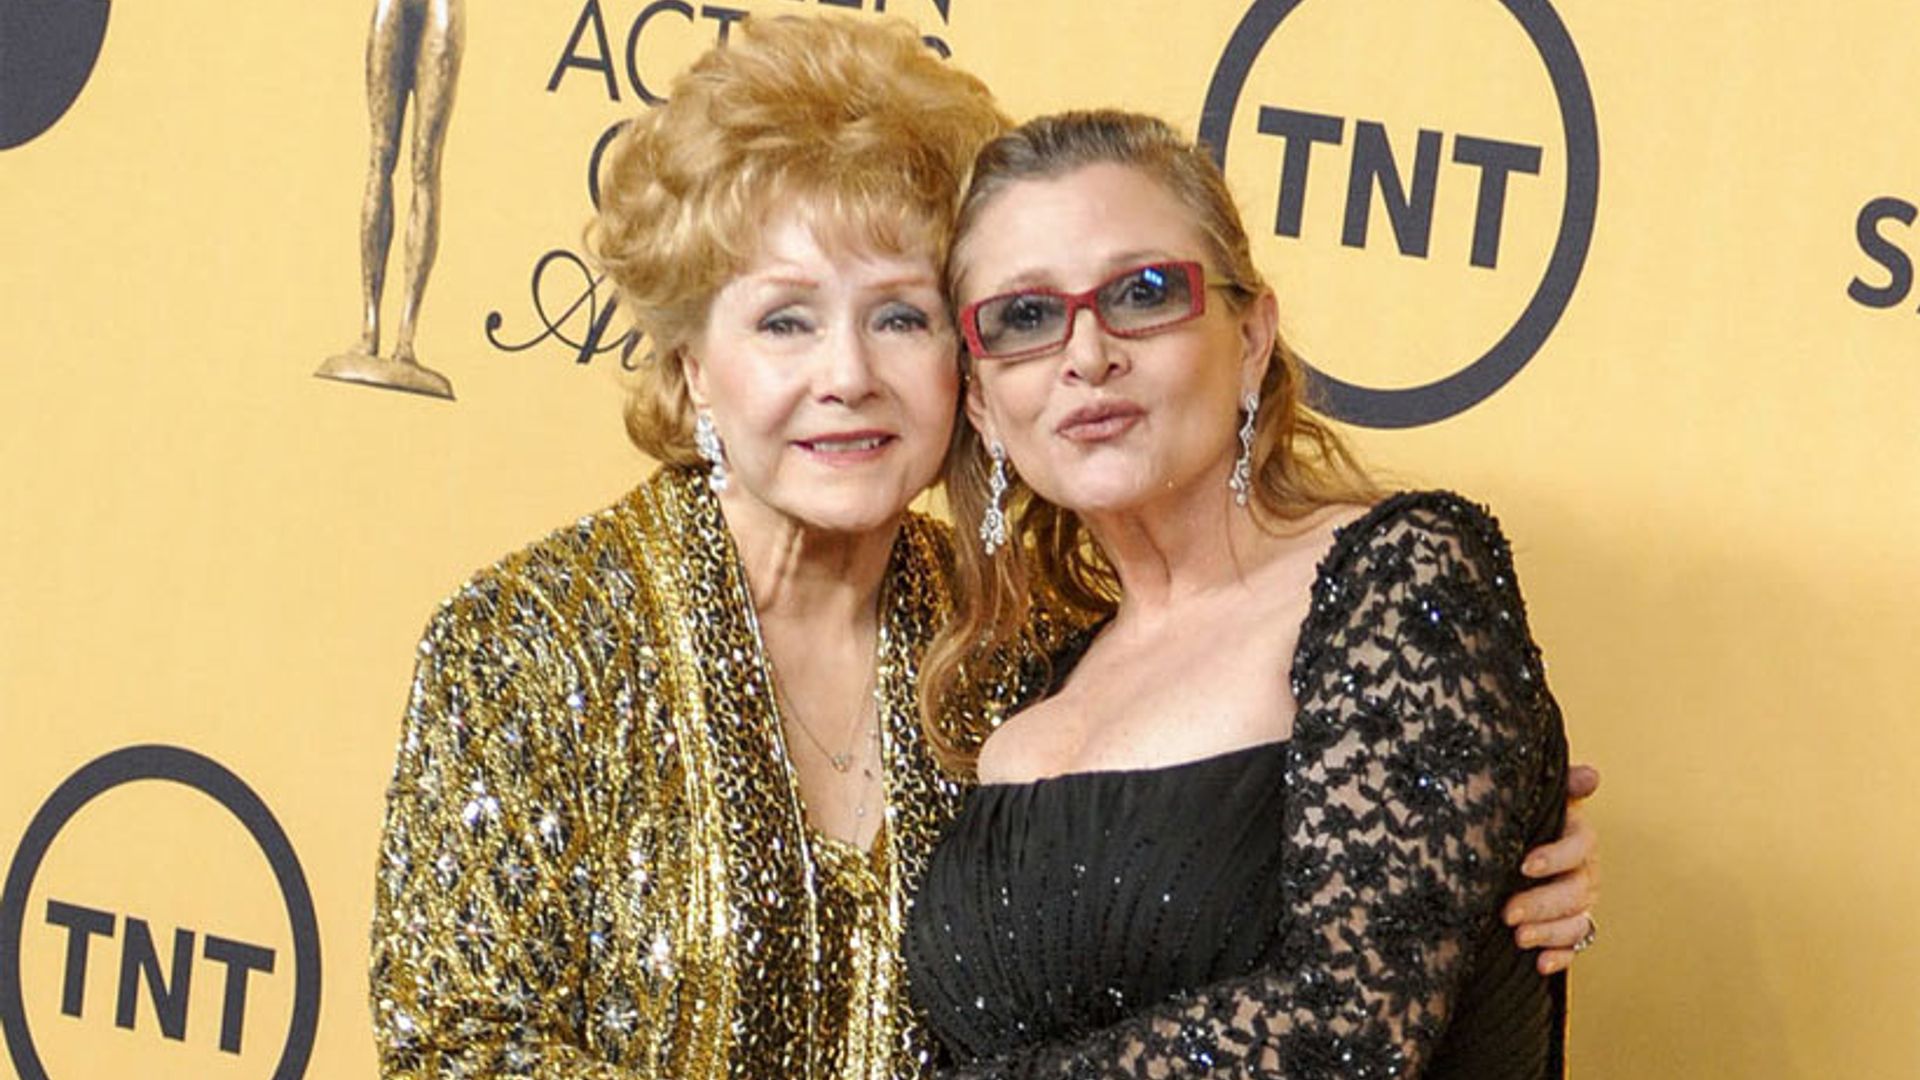 Debbie Reynolds and Carrie Fisher remembered by family, friends and fans at public memorial service